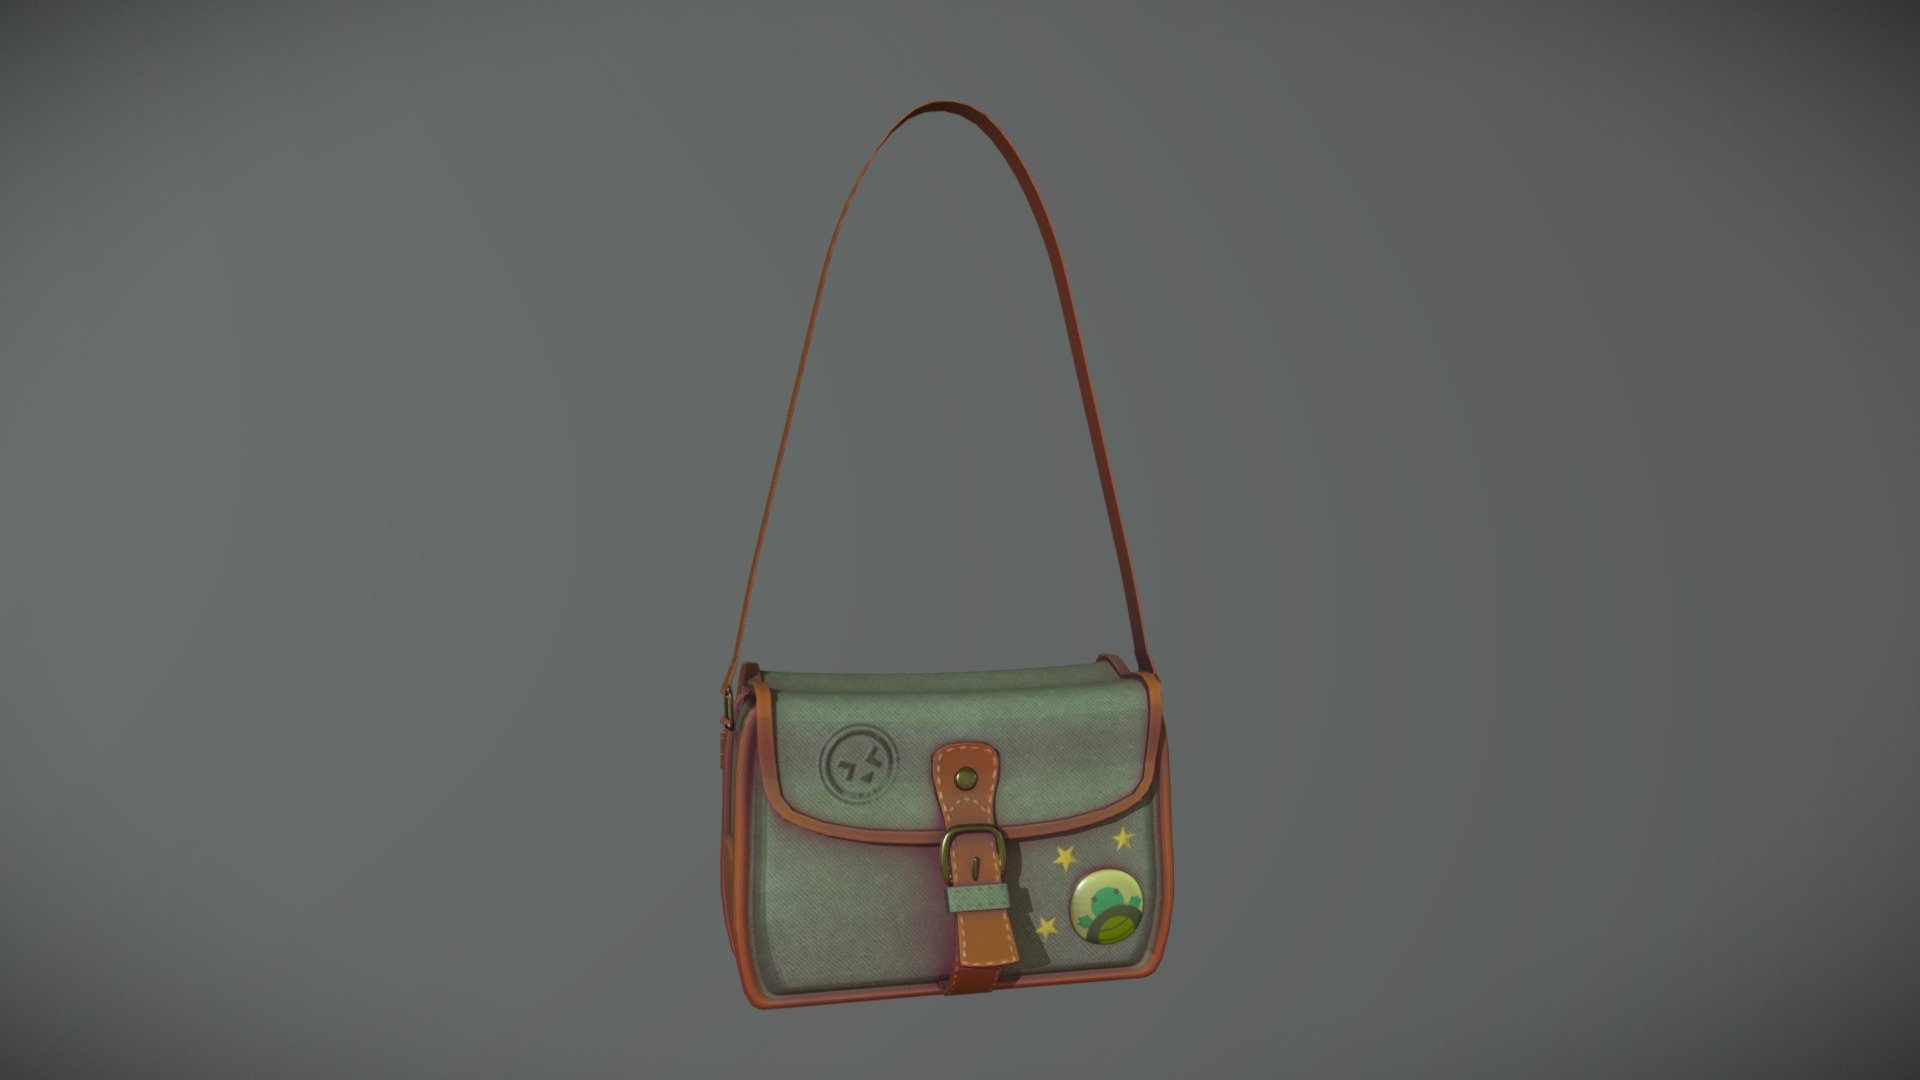 Testing out fabric/leather textures - Turtley cool messenger bag - 3D model by Samantha Griffith (@samanthagriffith) 3d model